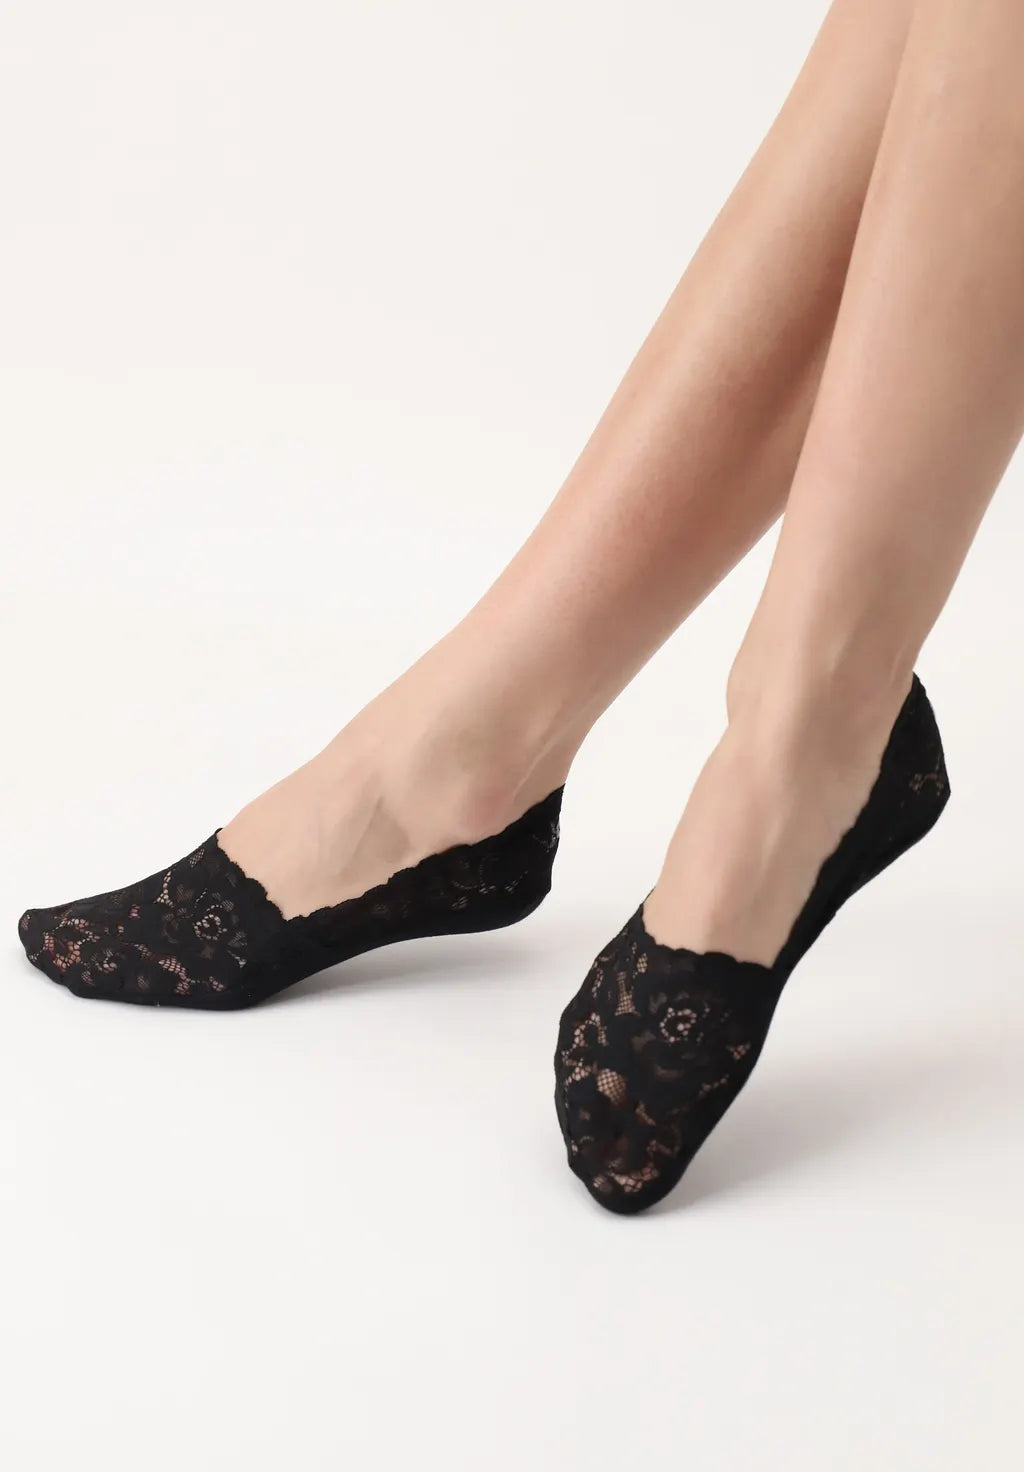 Oroblù Lacy No Show Socks - Black floral lace invisible sock made of soft lace with breathable cotton sole and non-slip silicone grip on the heel.